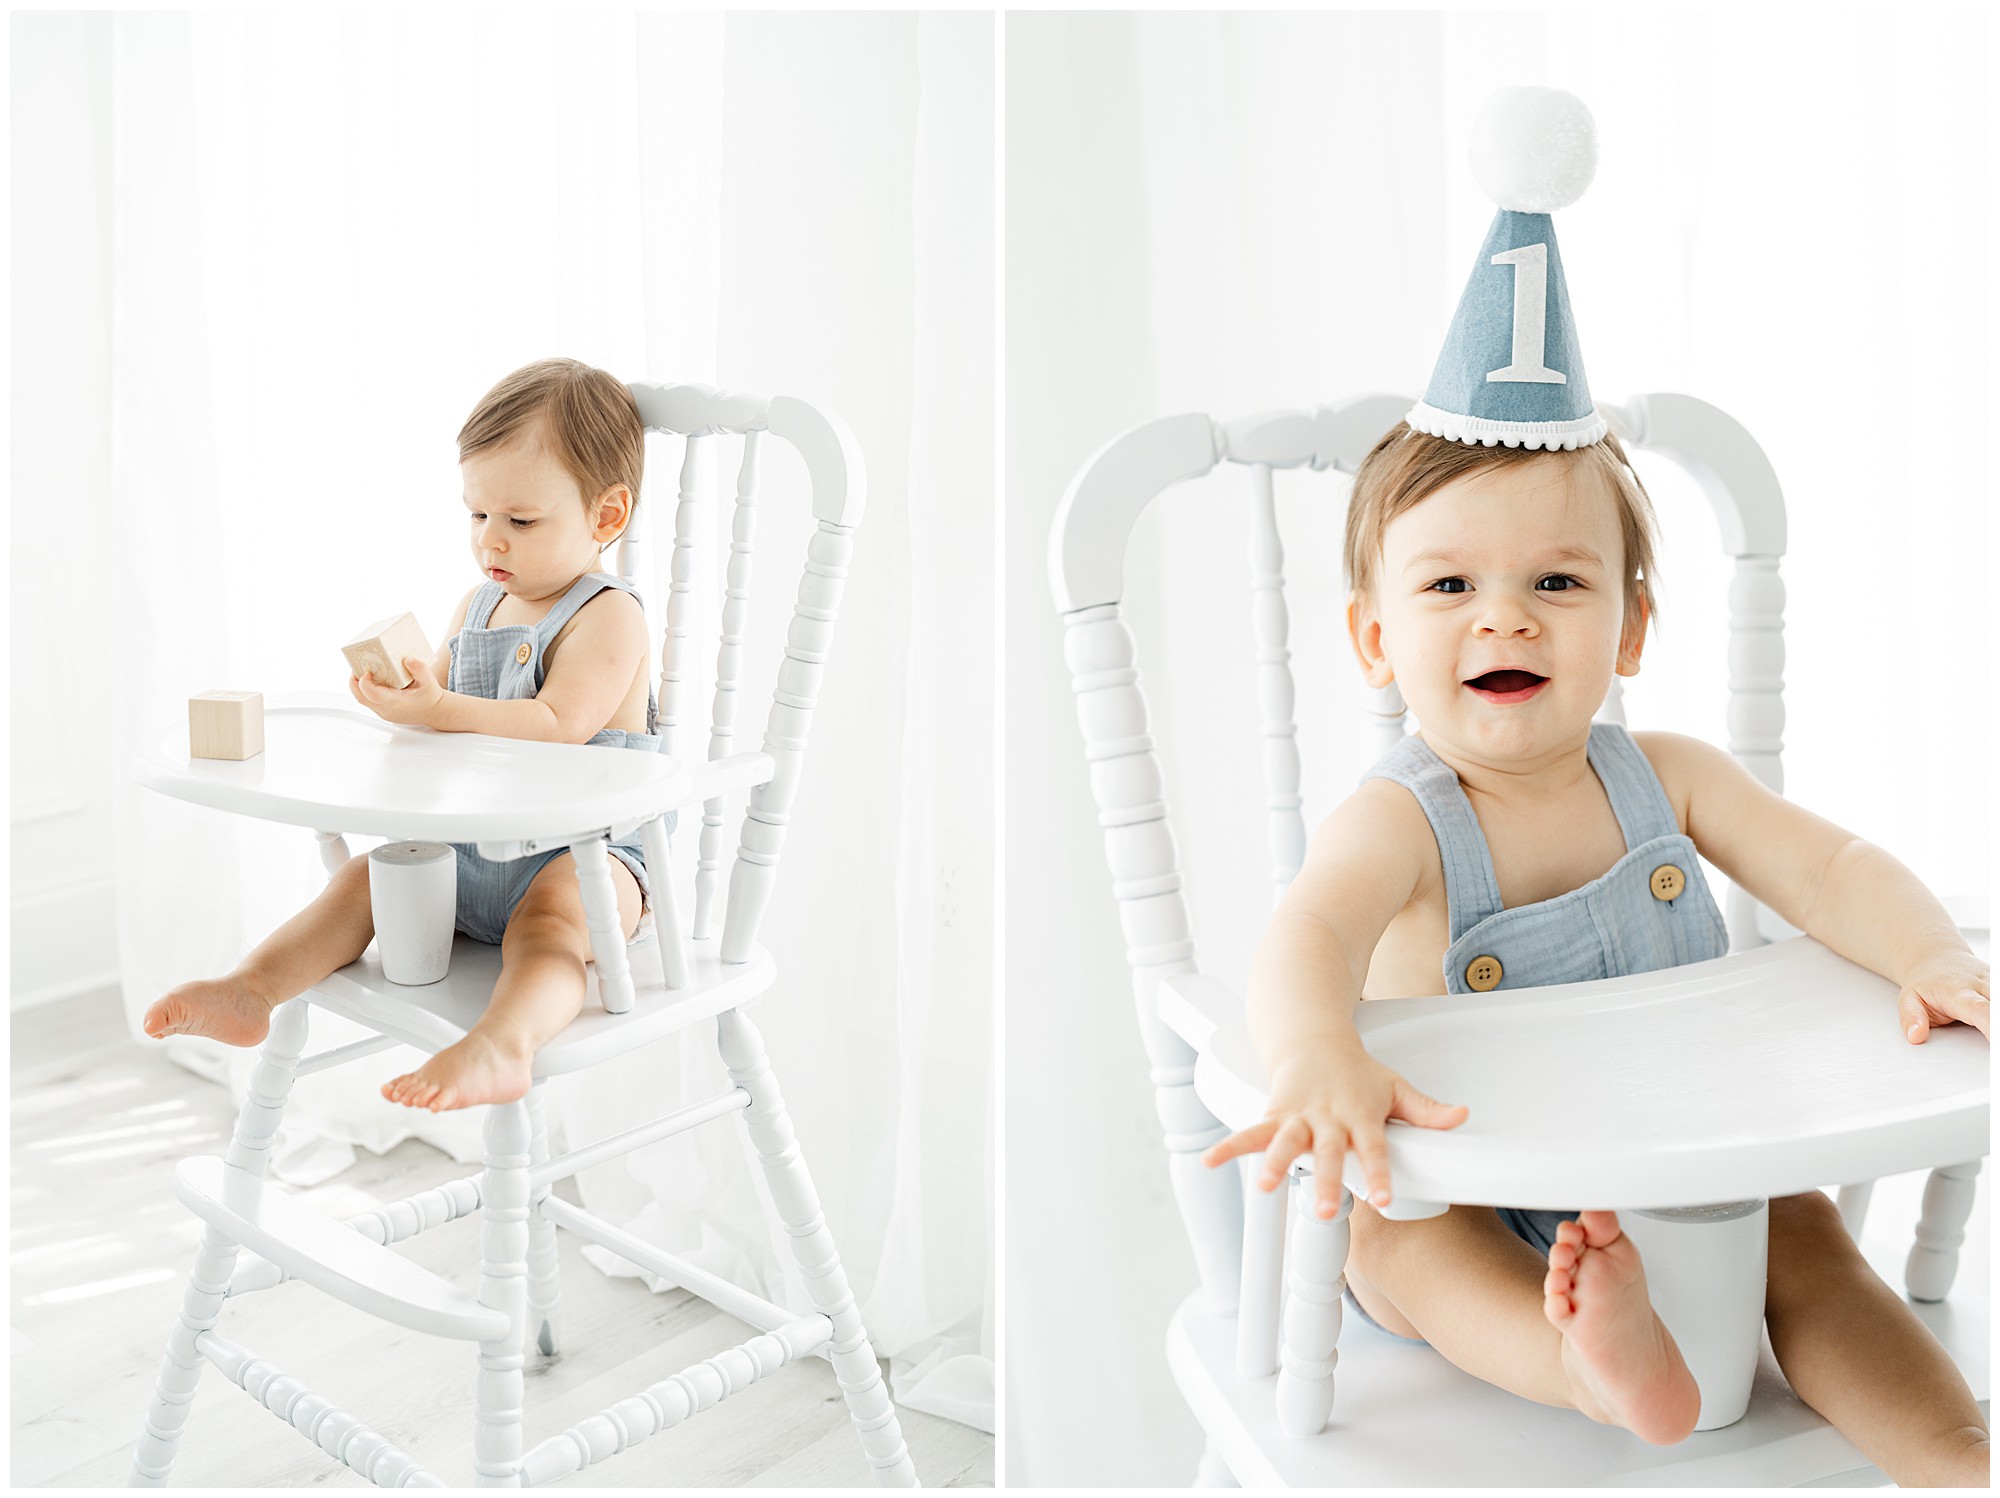 Two photos of a baby boy in a high chair and party hat during an Atlanta cake smash photo session.